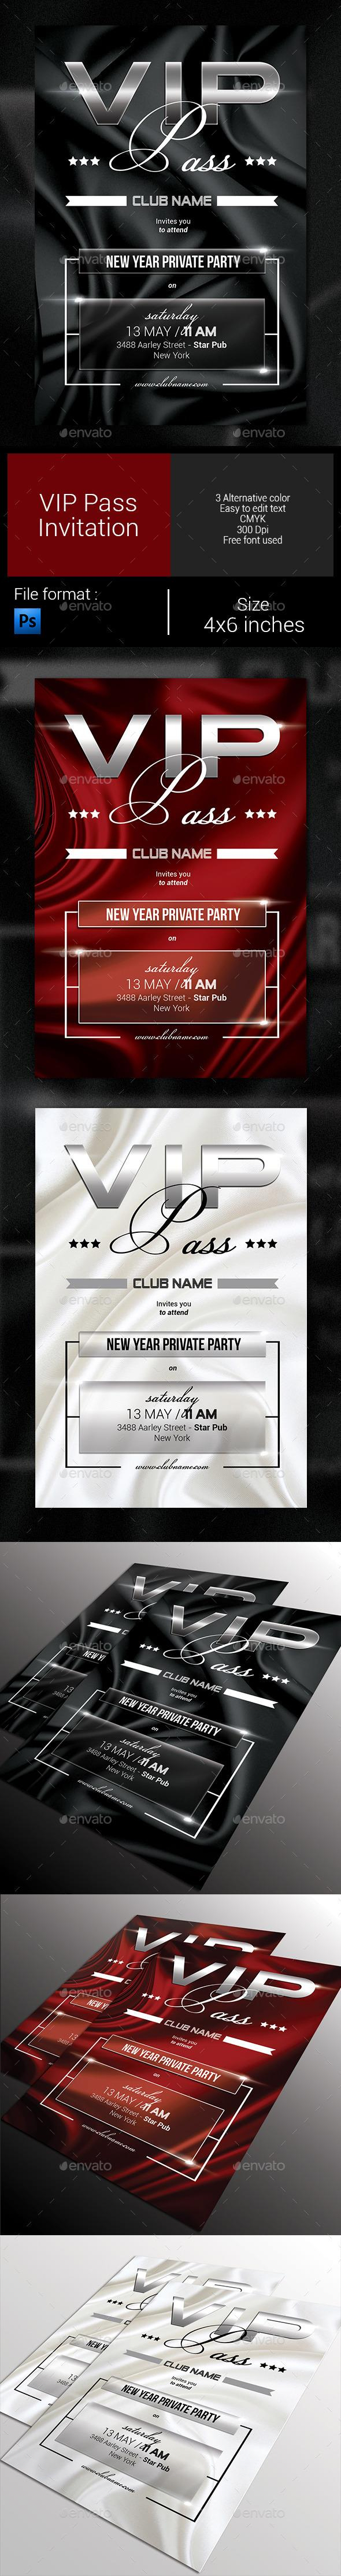 Vip Pass Invitation Template Cards Print Invites Cards with size 590 X 4459